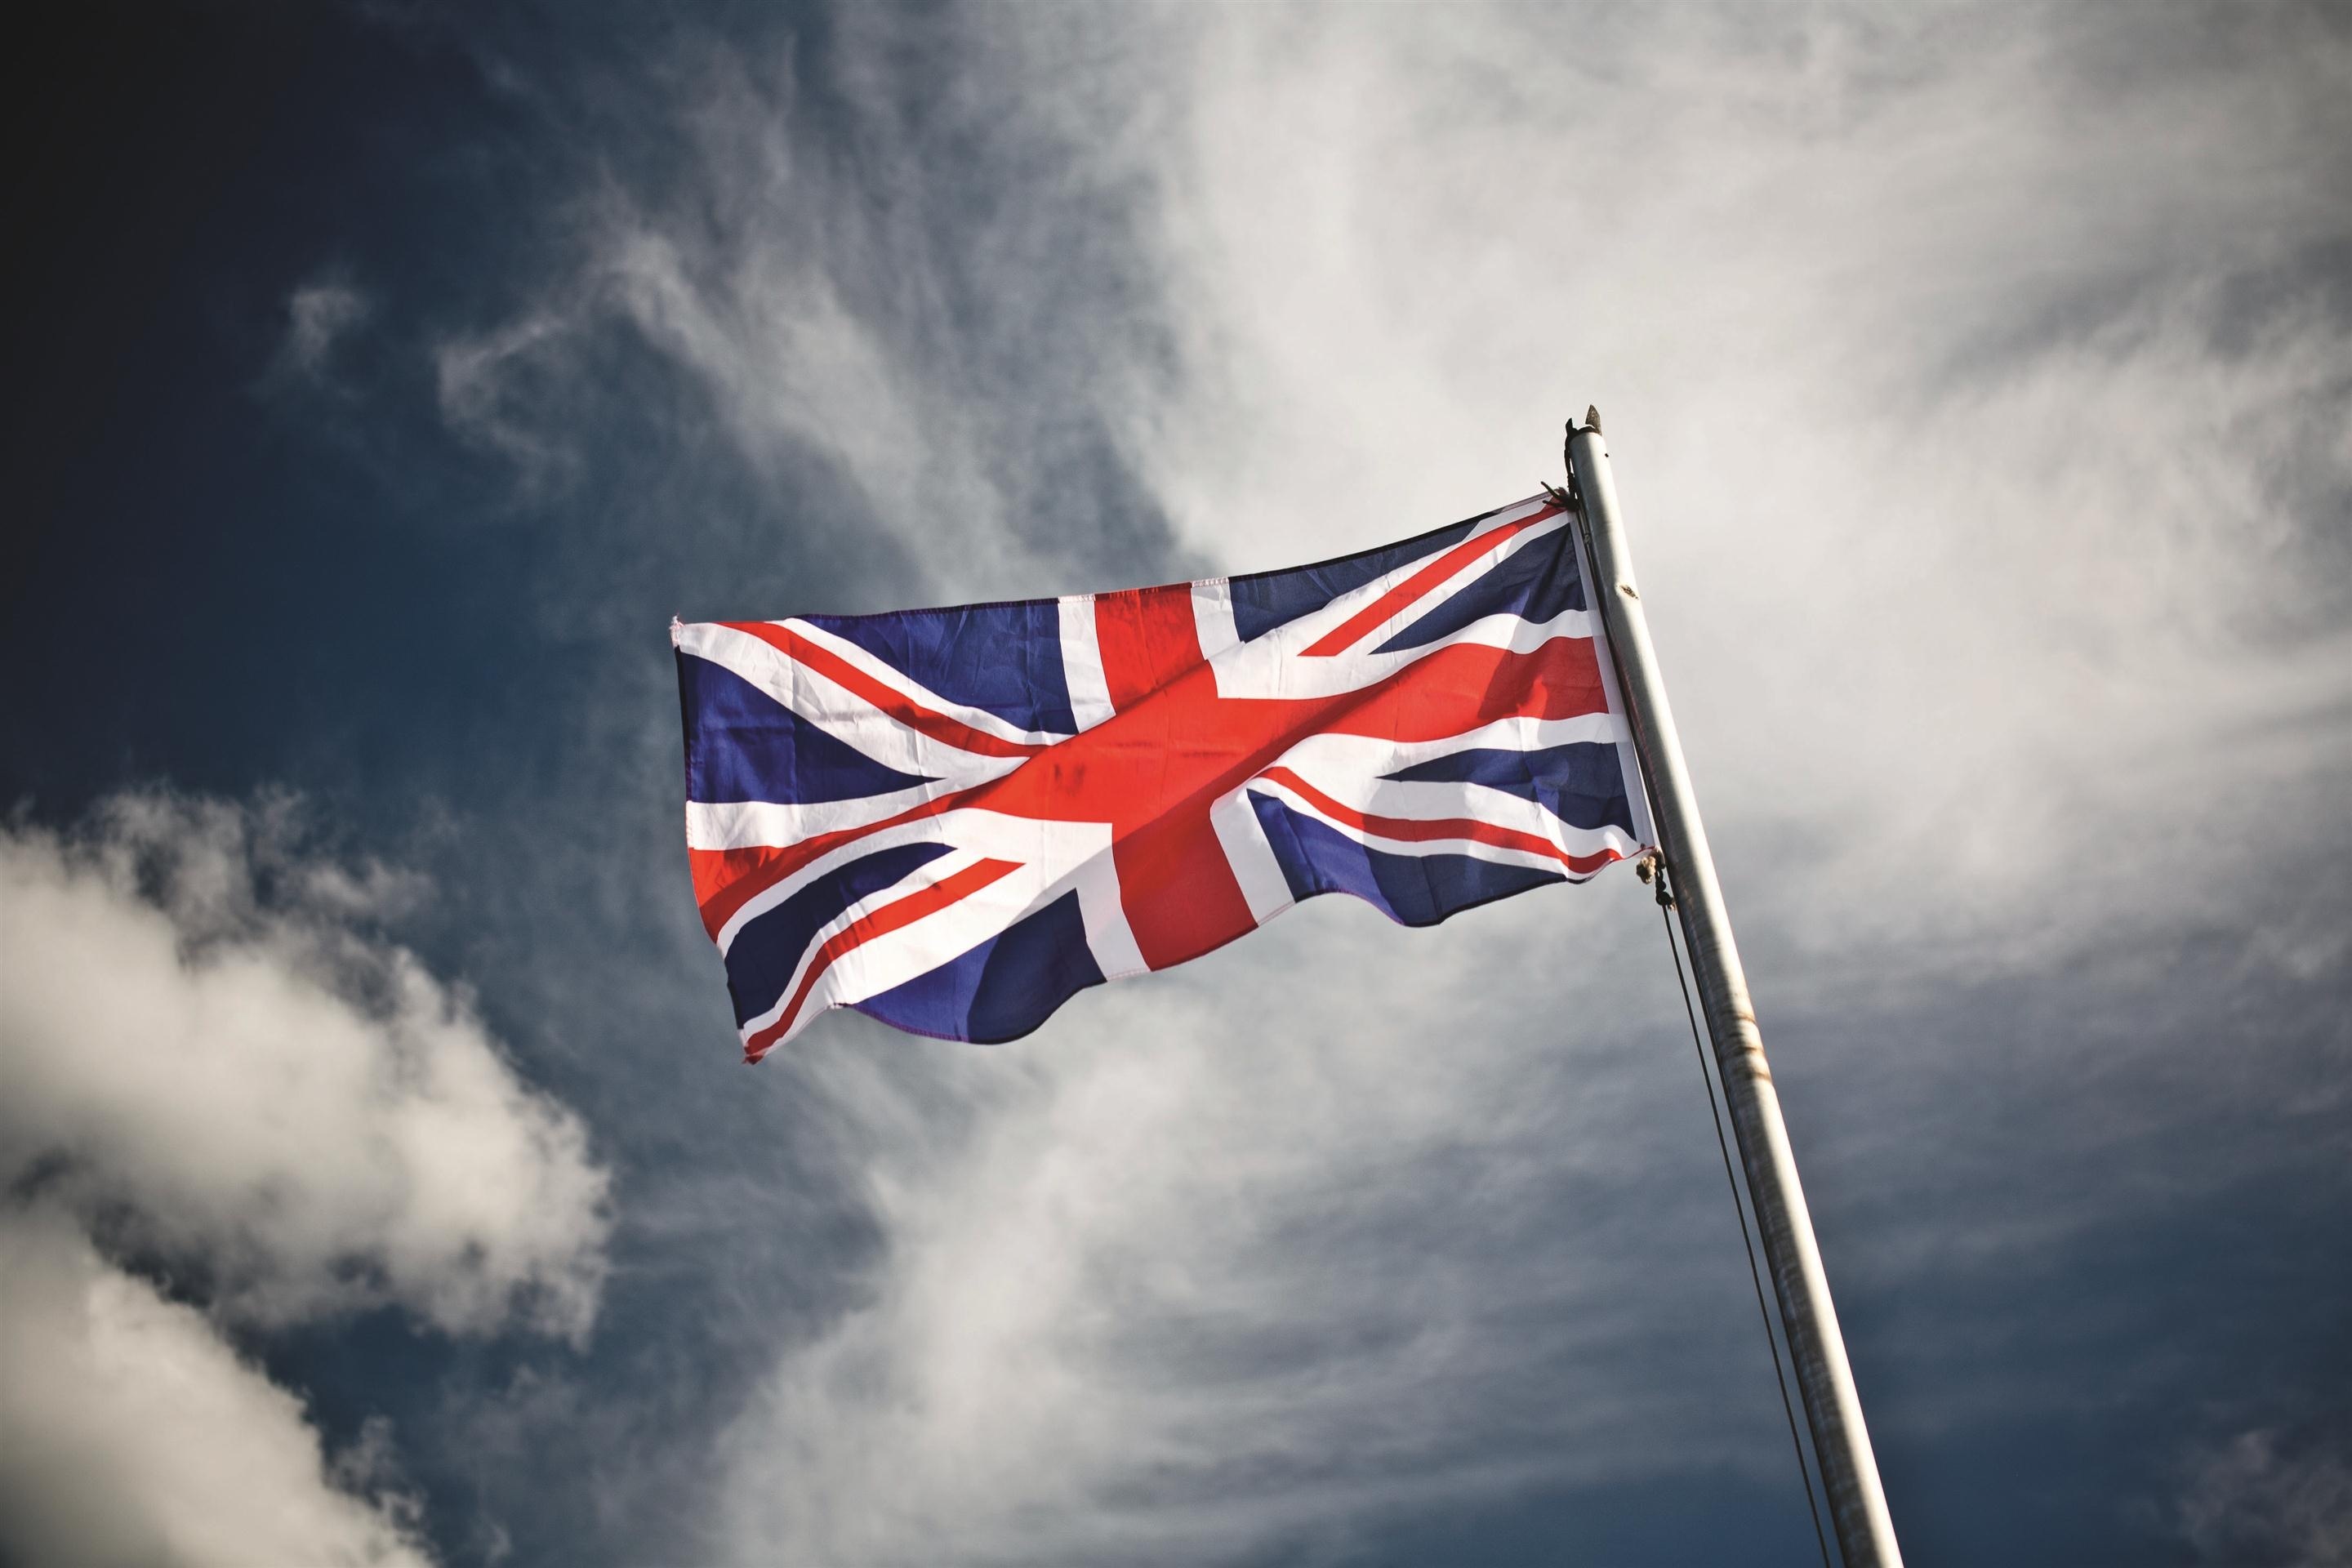 Popular Great Britain Image for Phone